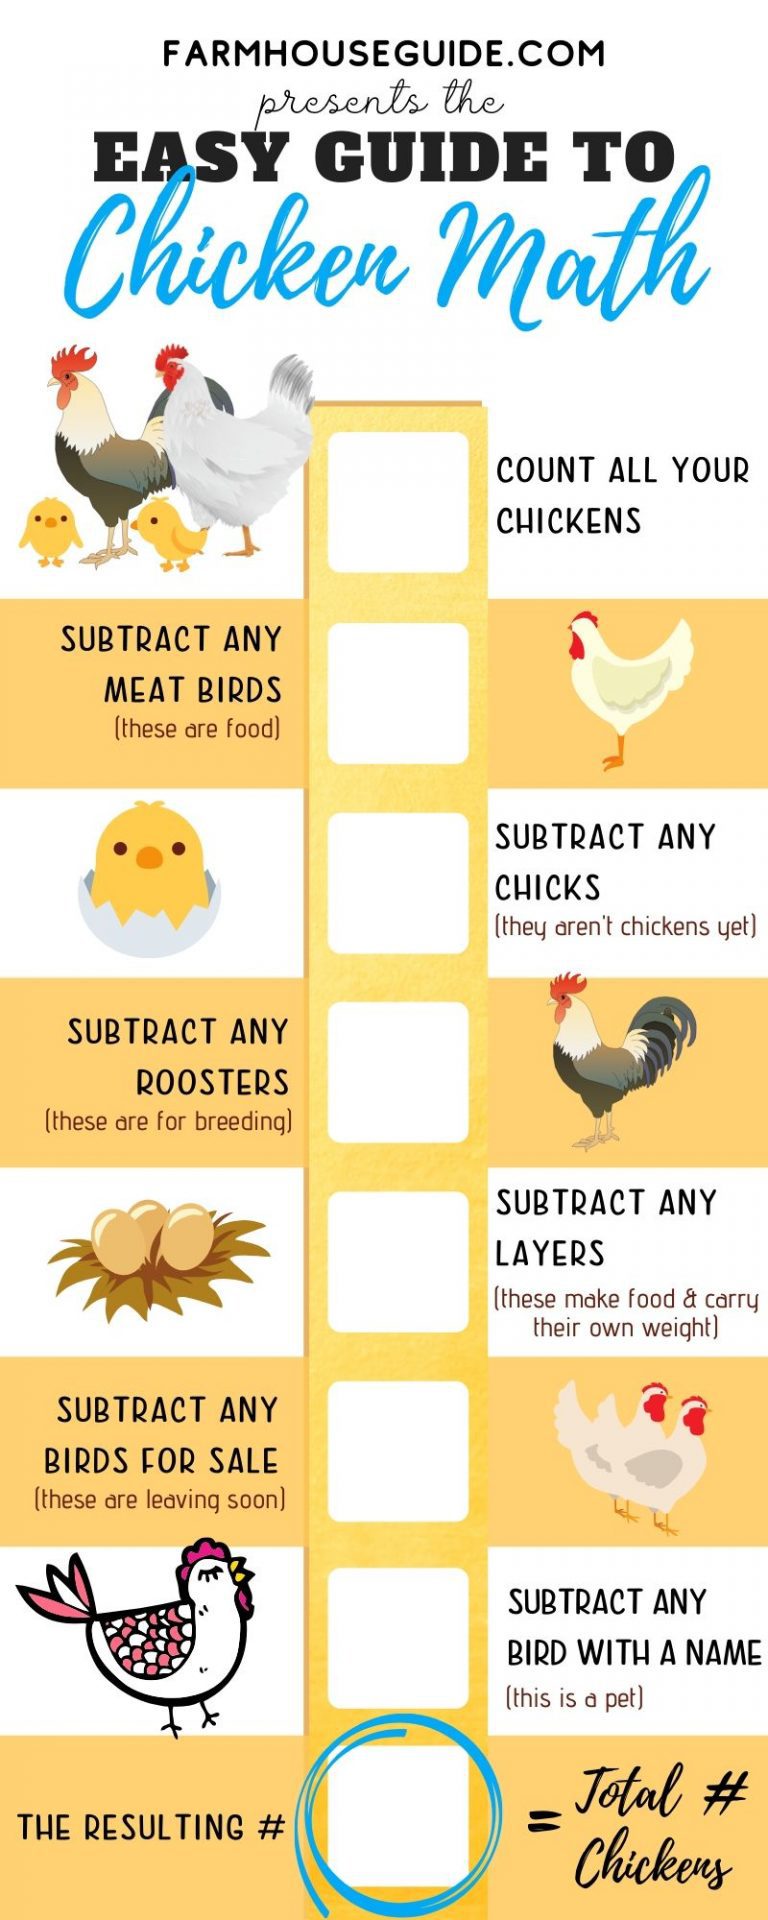 chicken-math-explained-calculating-your-true-number-of-chickens-farmhouse-guide